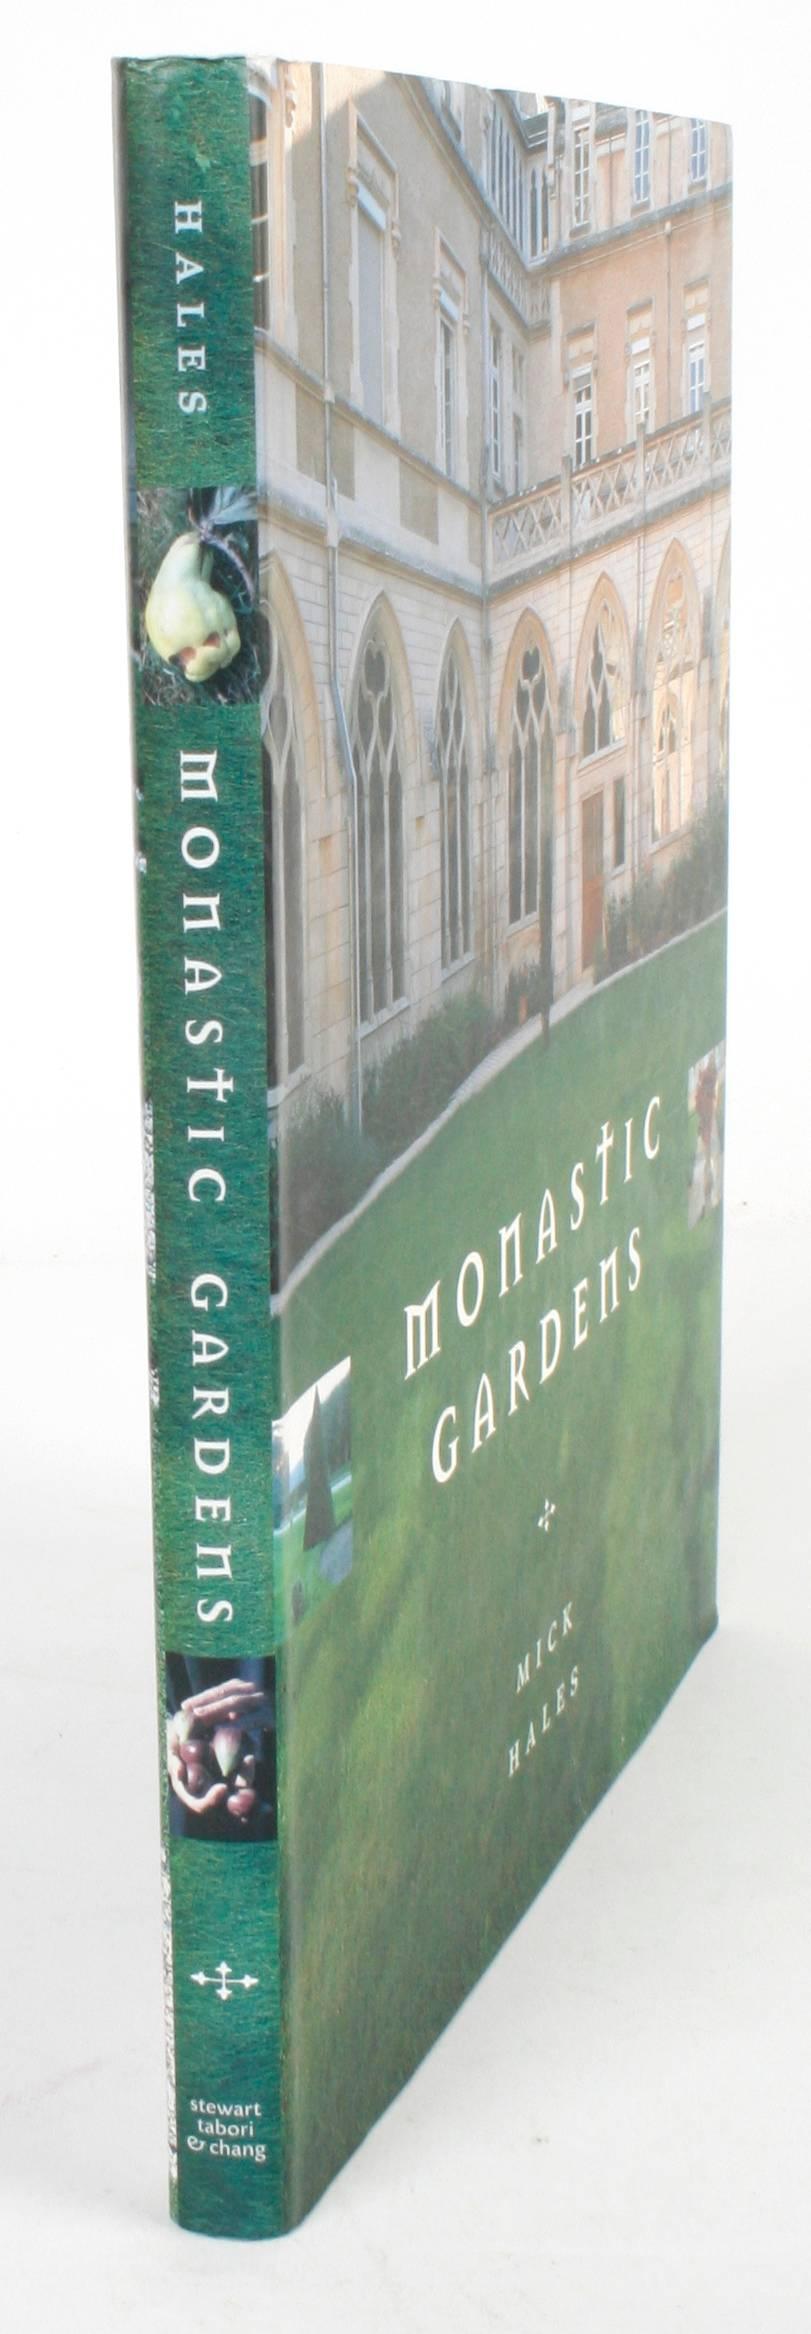 Monastic Gardens by Mick Hales, First Edition 10